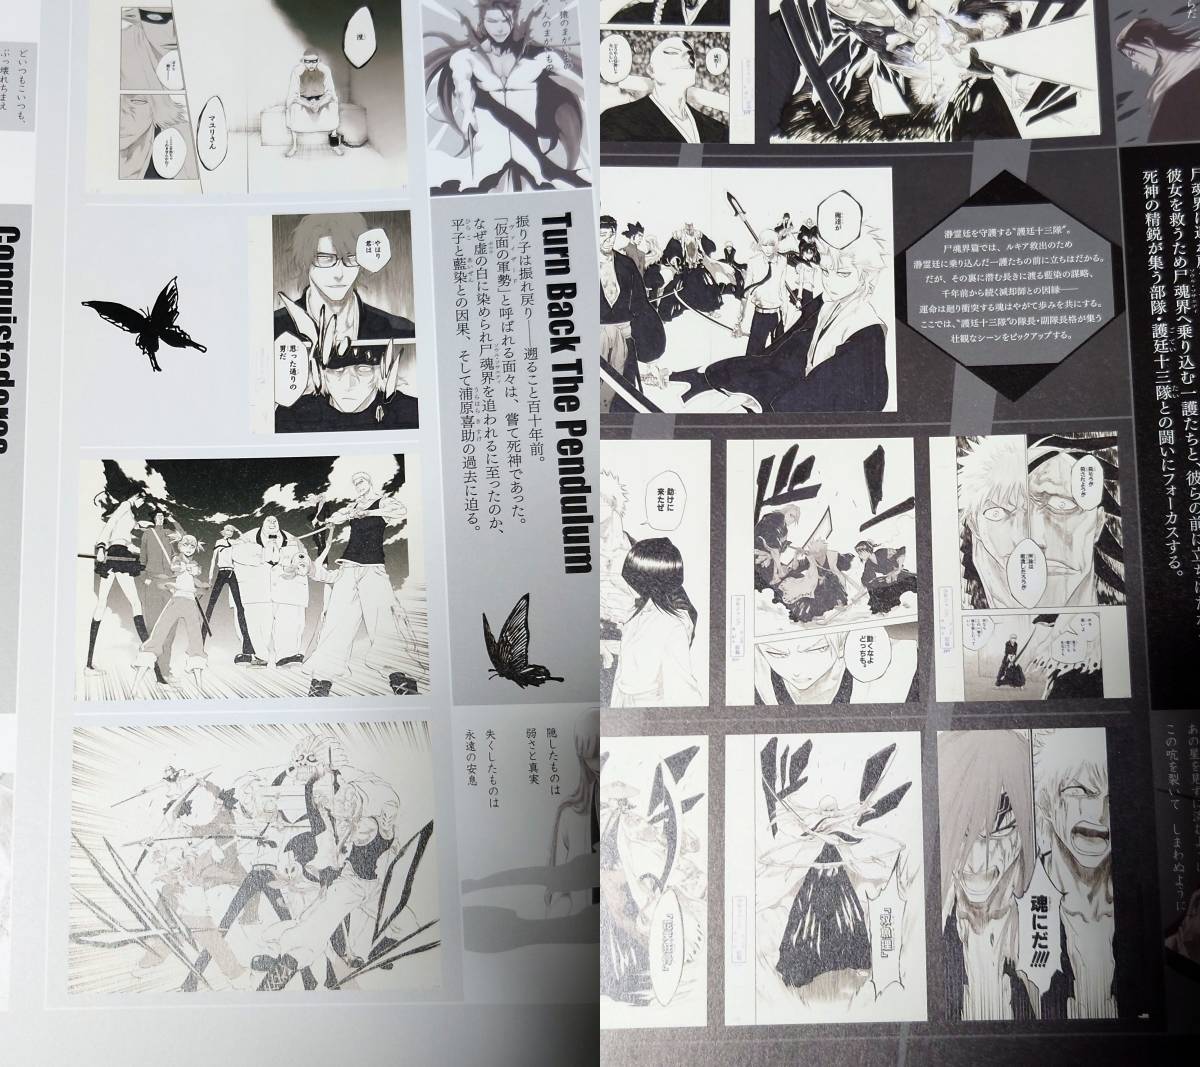  BLEACH EX. OFFICIAL PAMPHLET 20周年 原画展 ブリーチ パンフレット_画像9